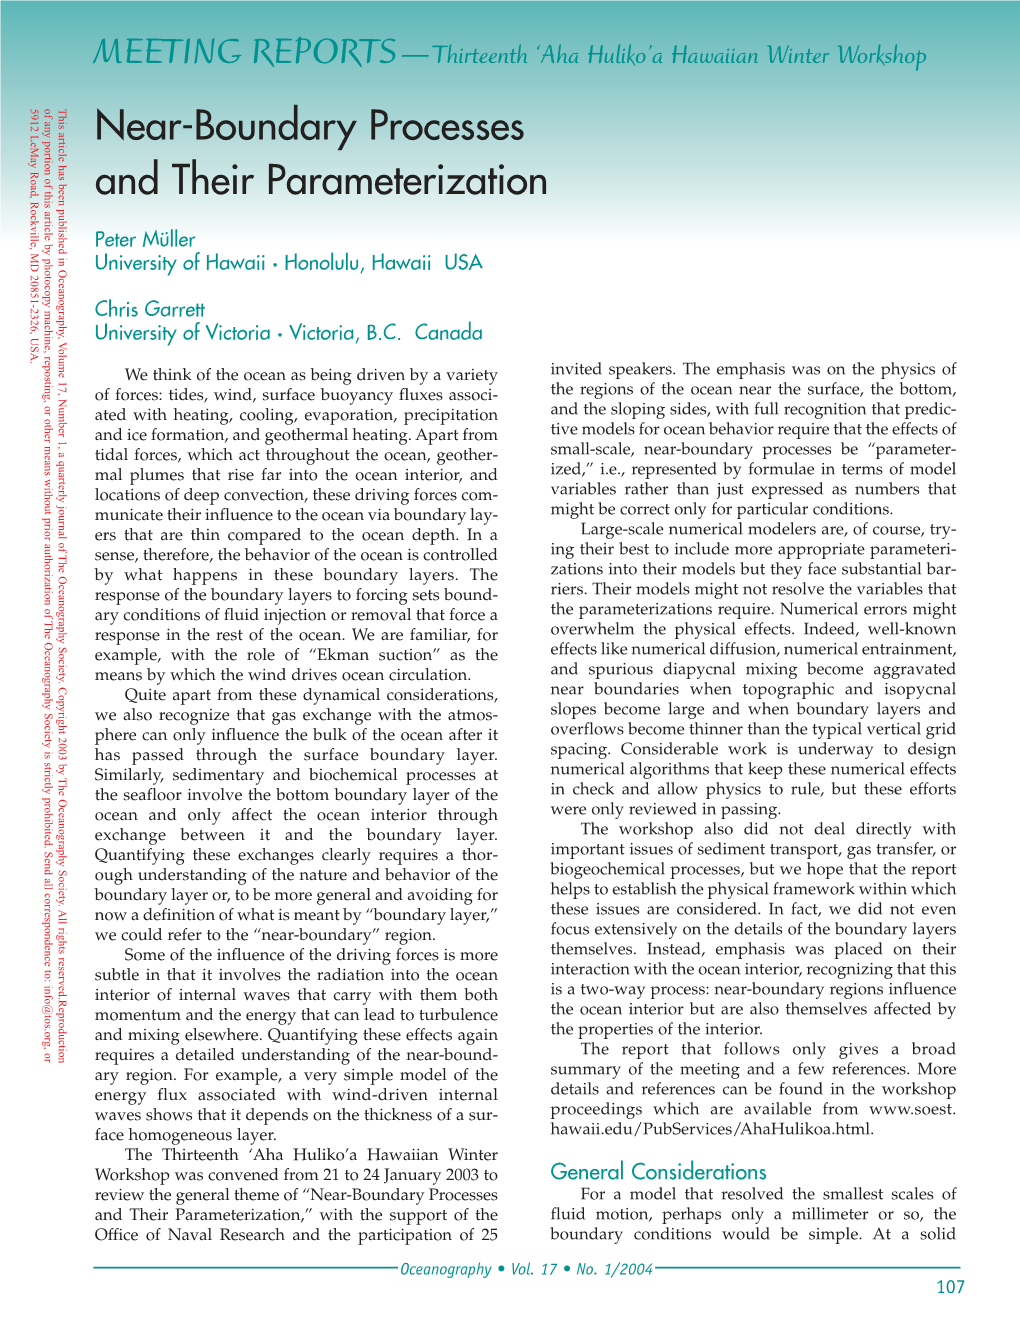 Near-Boundary Processes and Their Parameterization